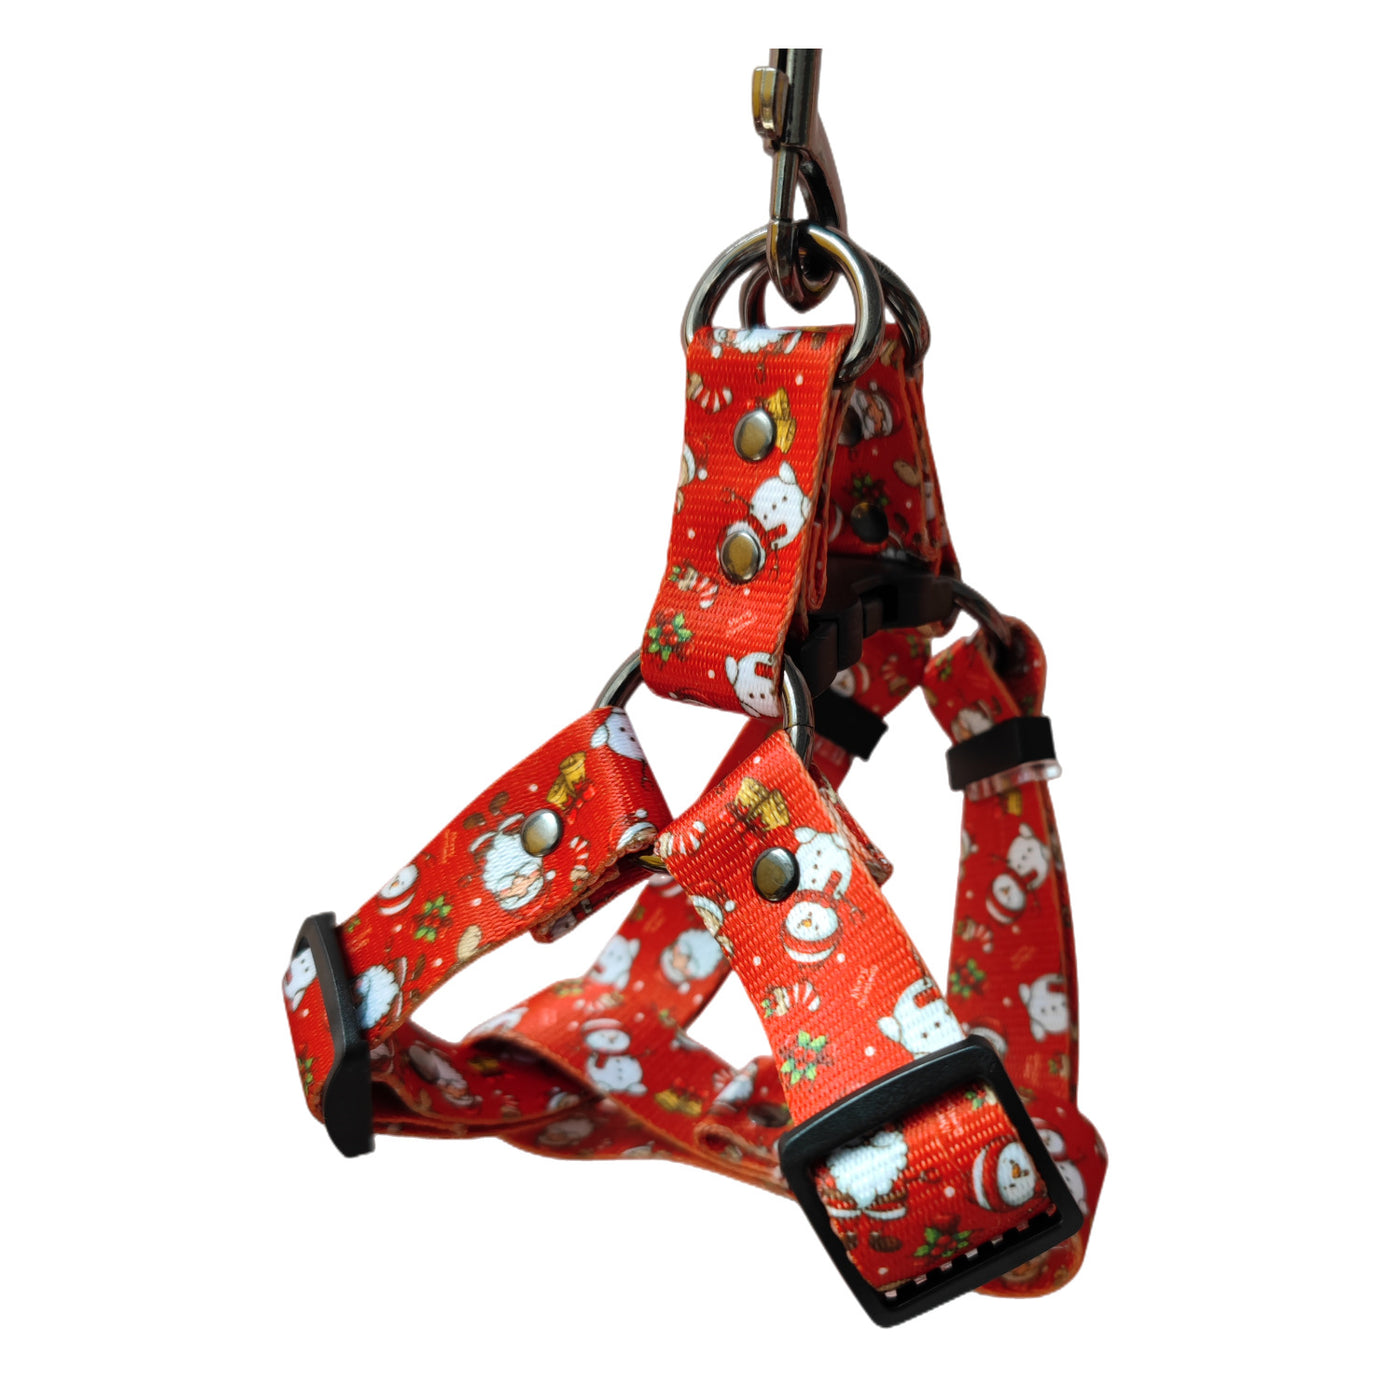 Durable Christmas Dog Leash Chest Harness Pet for adventure